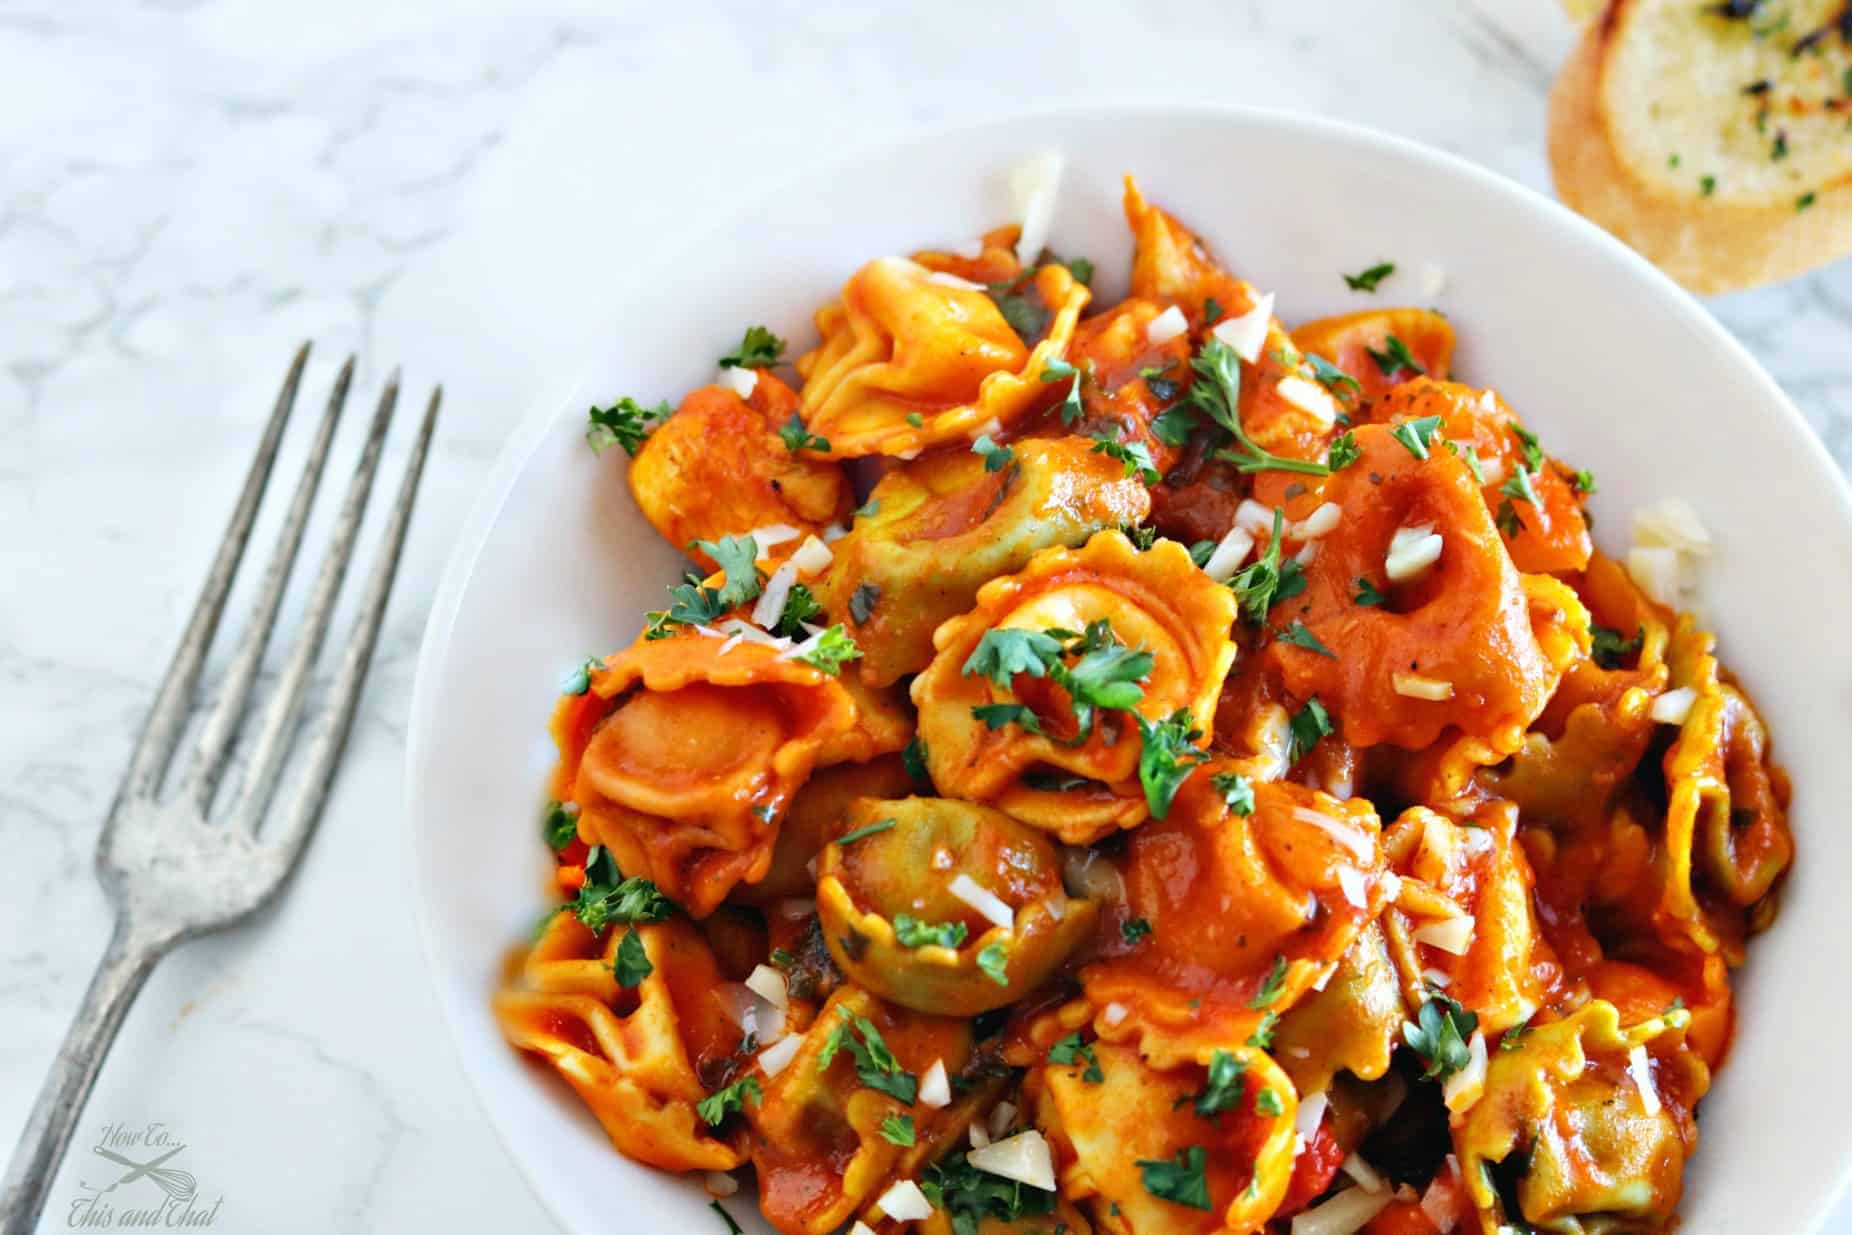 chicken and cheese tortellini in fire roasted red pepper sauce